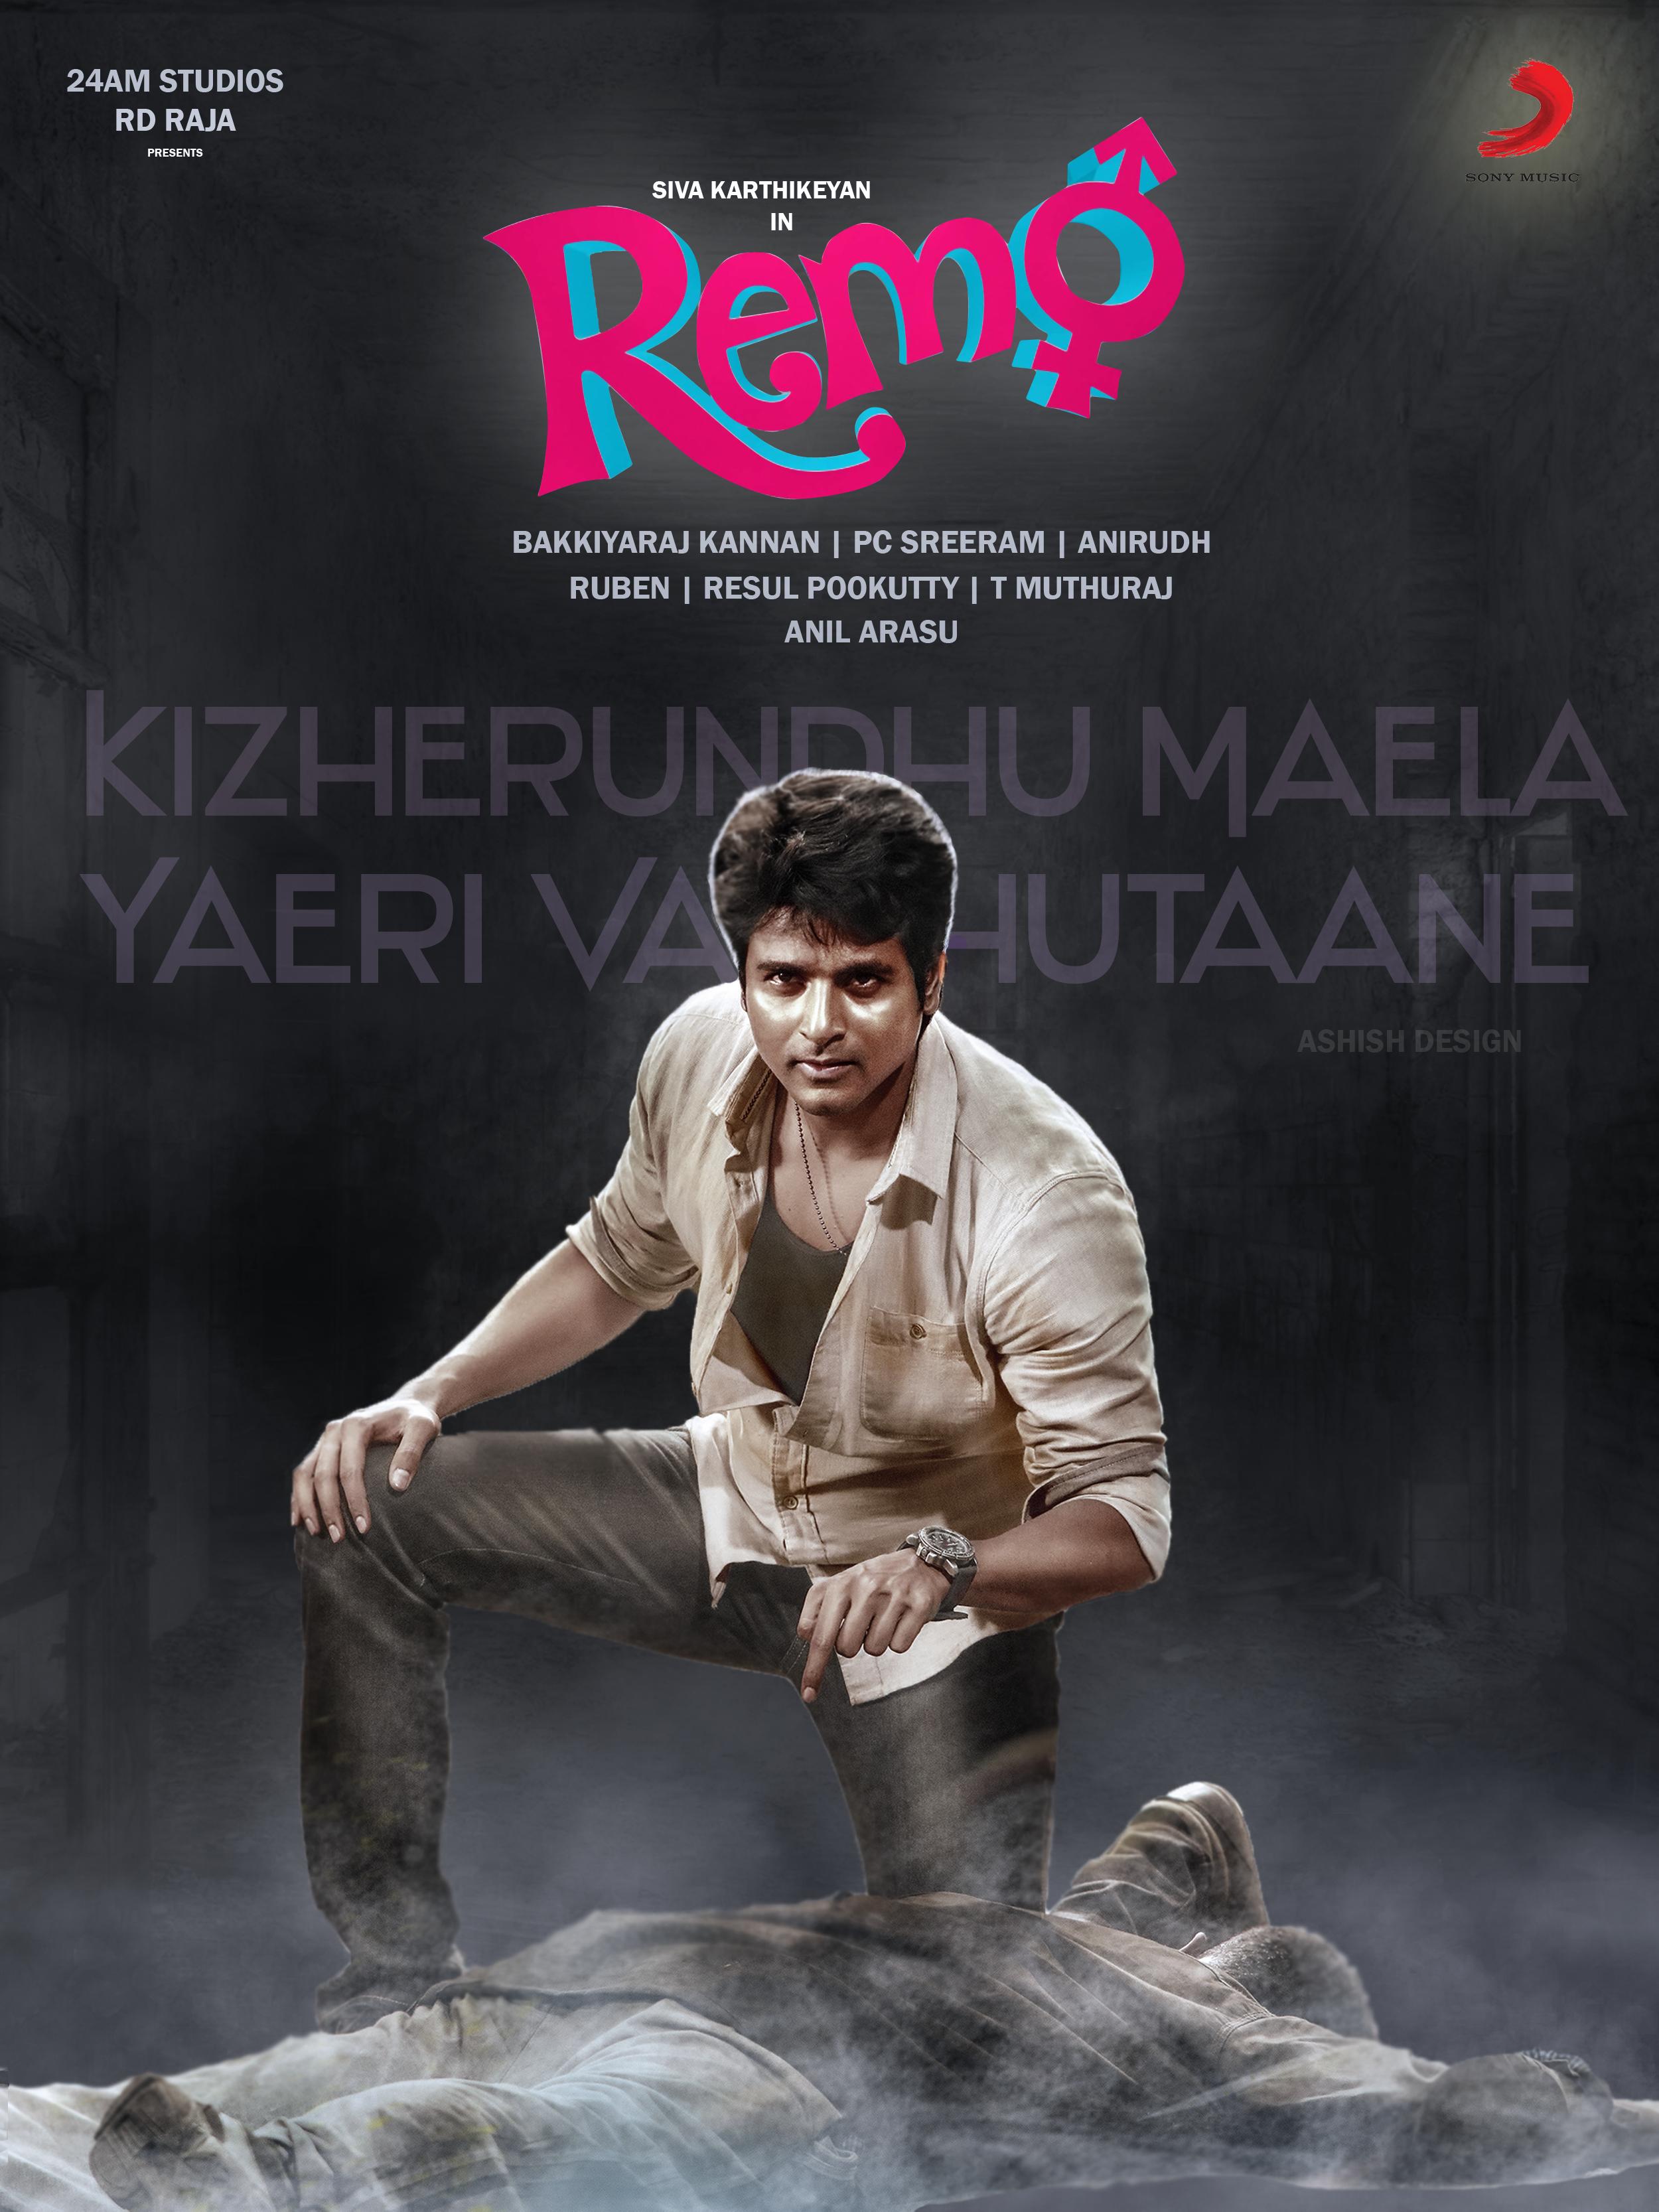 Remo Background Images - Remo Background , HD Wallpaper & Backgrounds